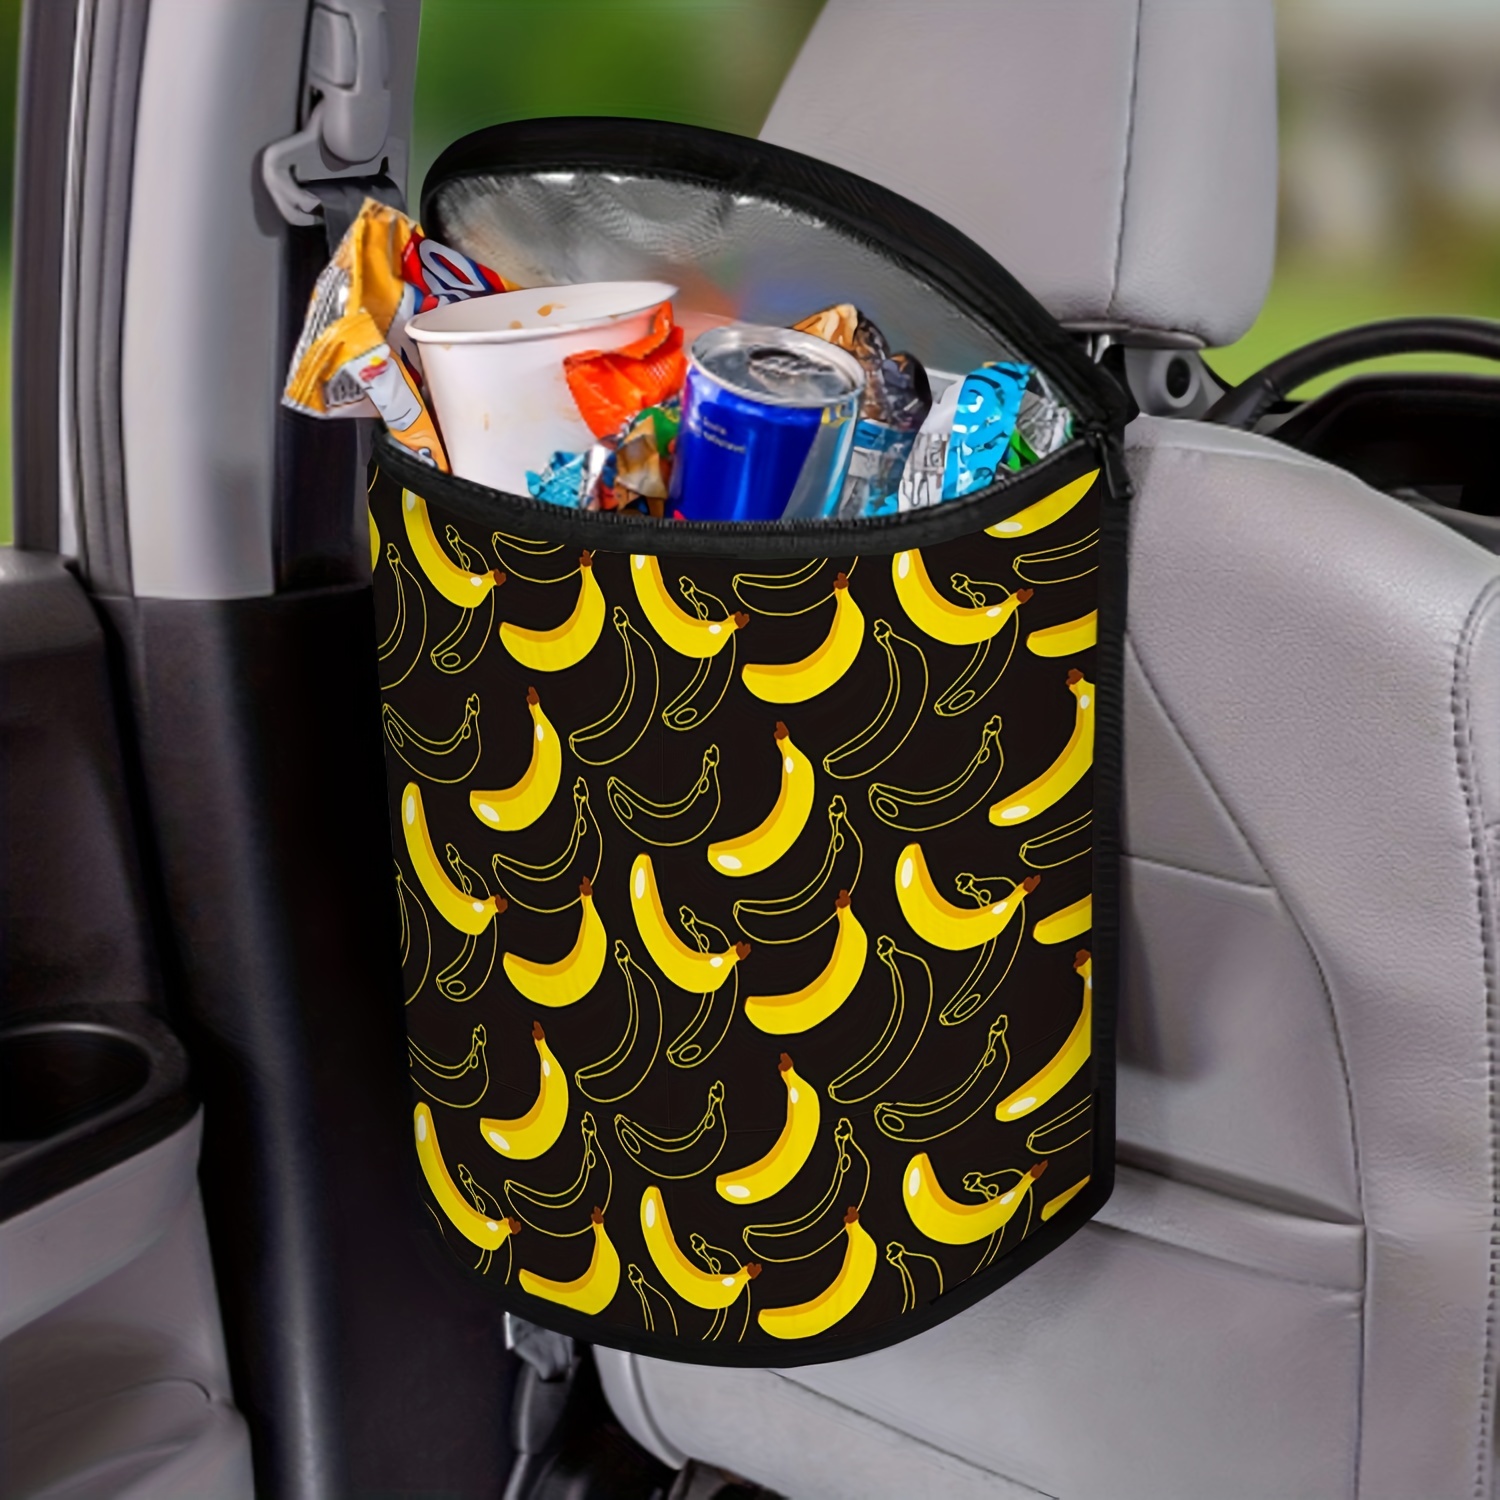 Car Trash Can (Free with video) - Sew Modern Bags